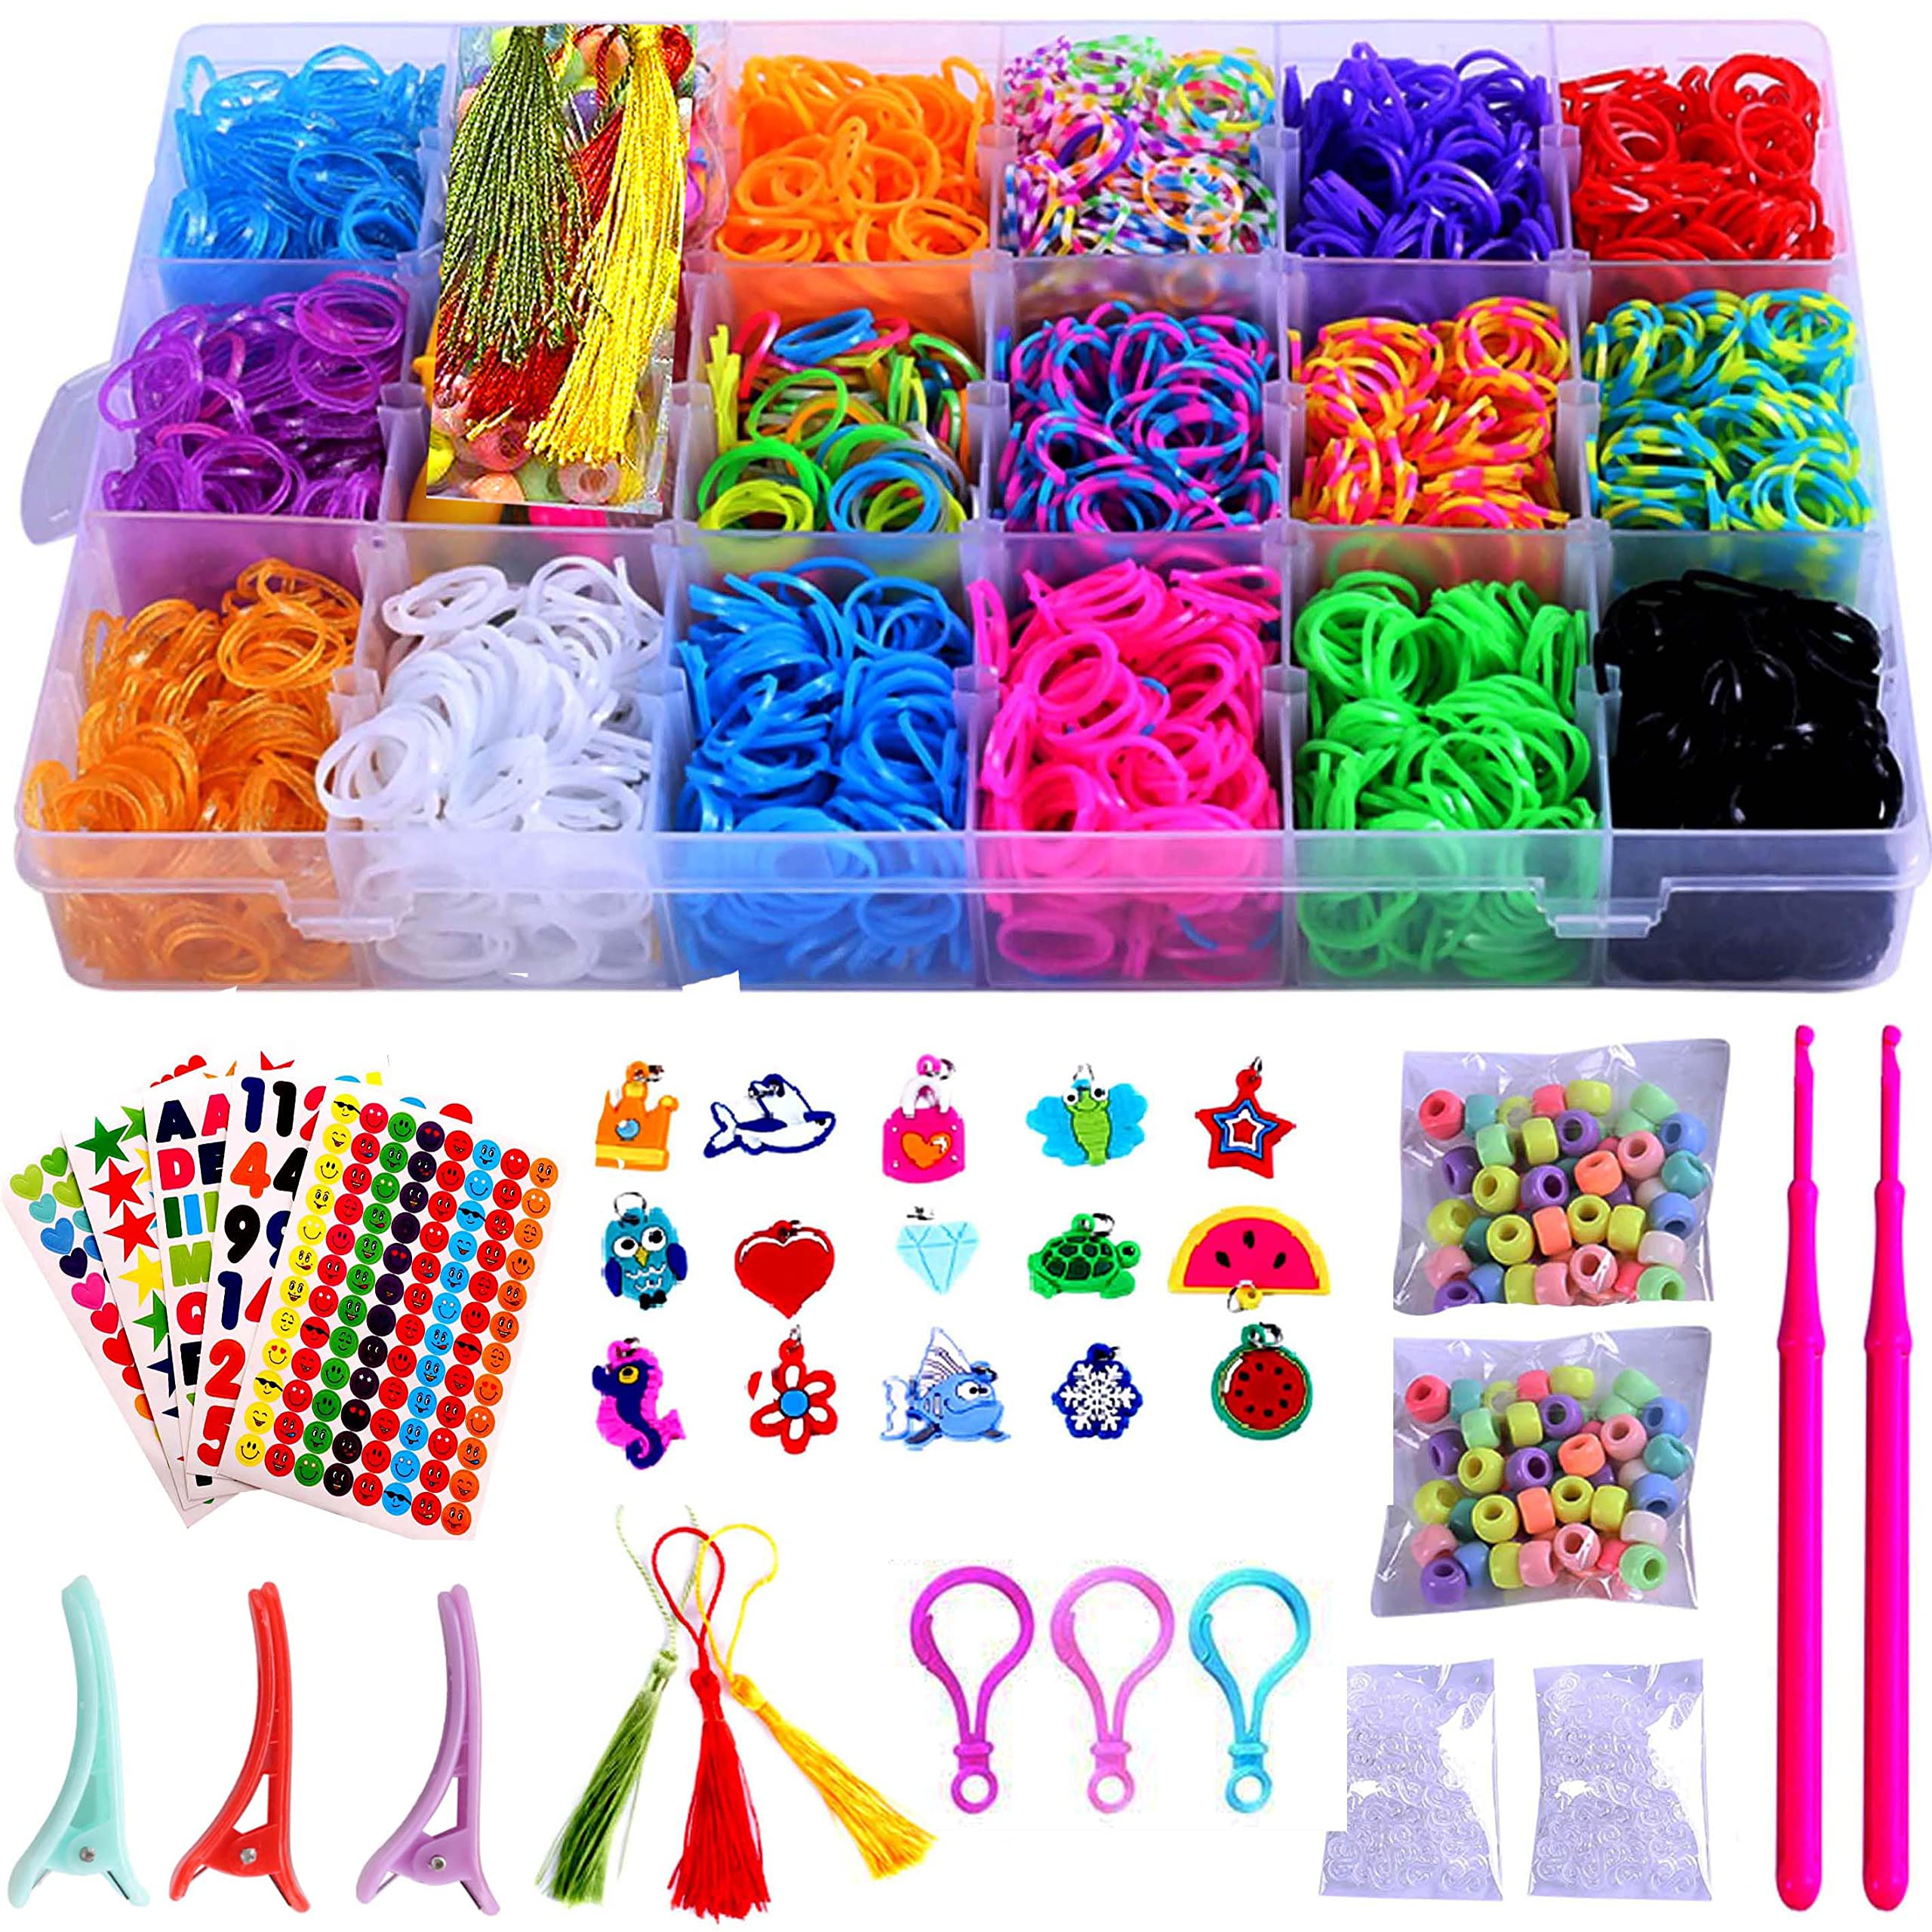 Spare Set For Children's Bracelets 352 Beads Rubber Loom Bands 600 Clips  Creative Diy 5 Looms And 40 Cartoon Pendants